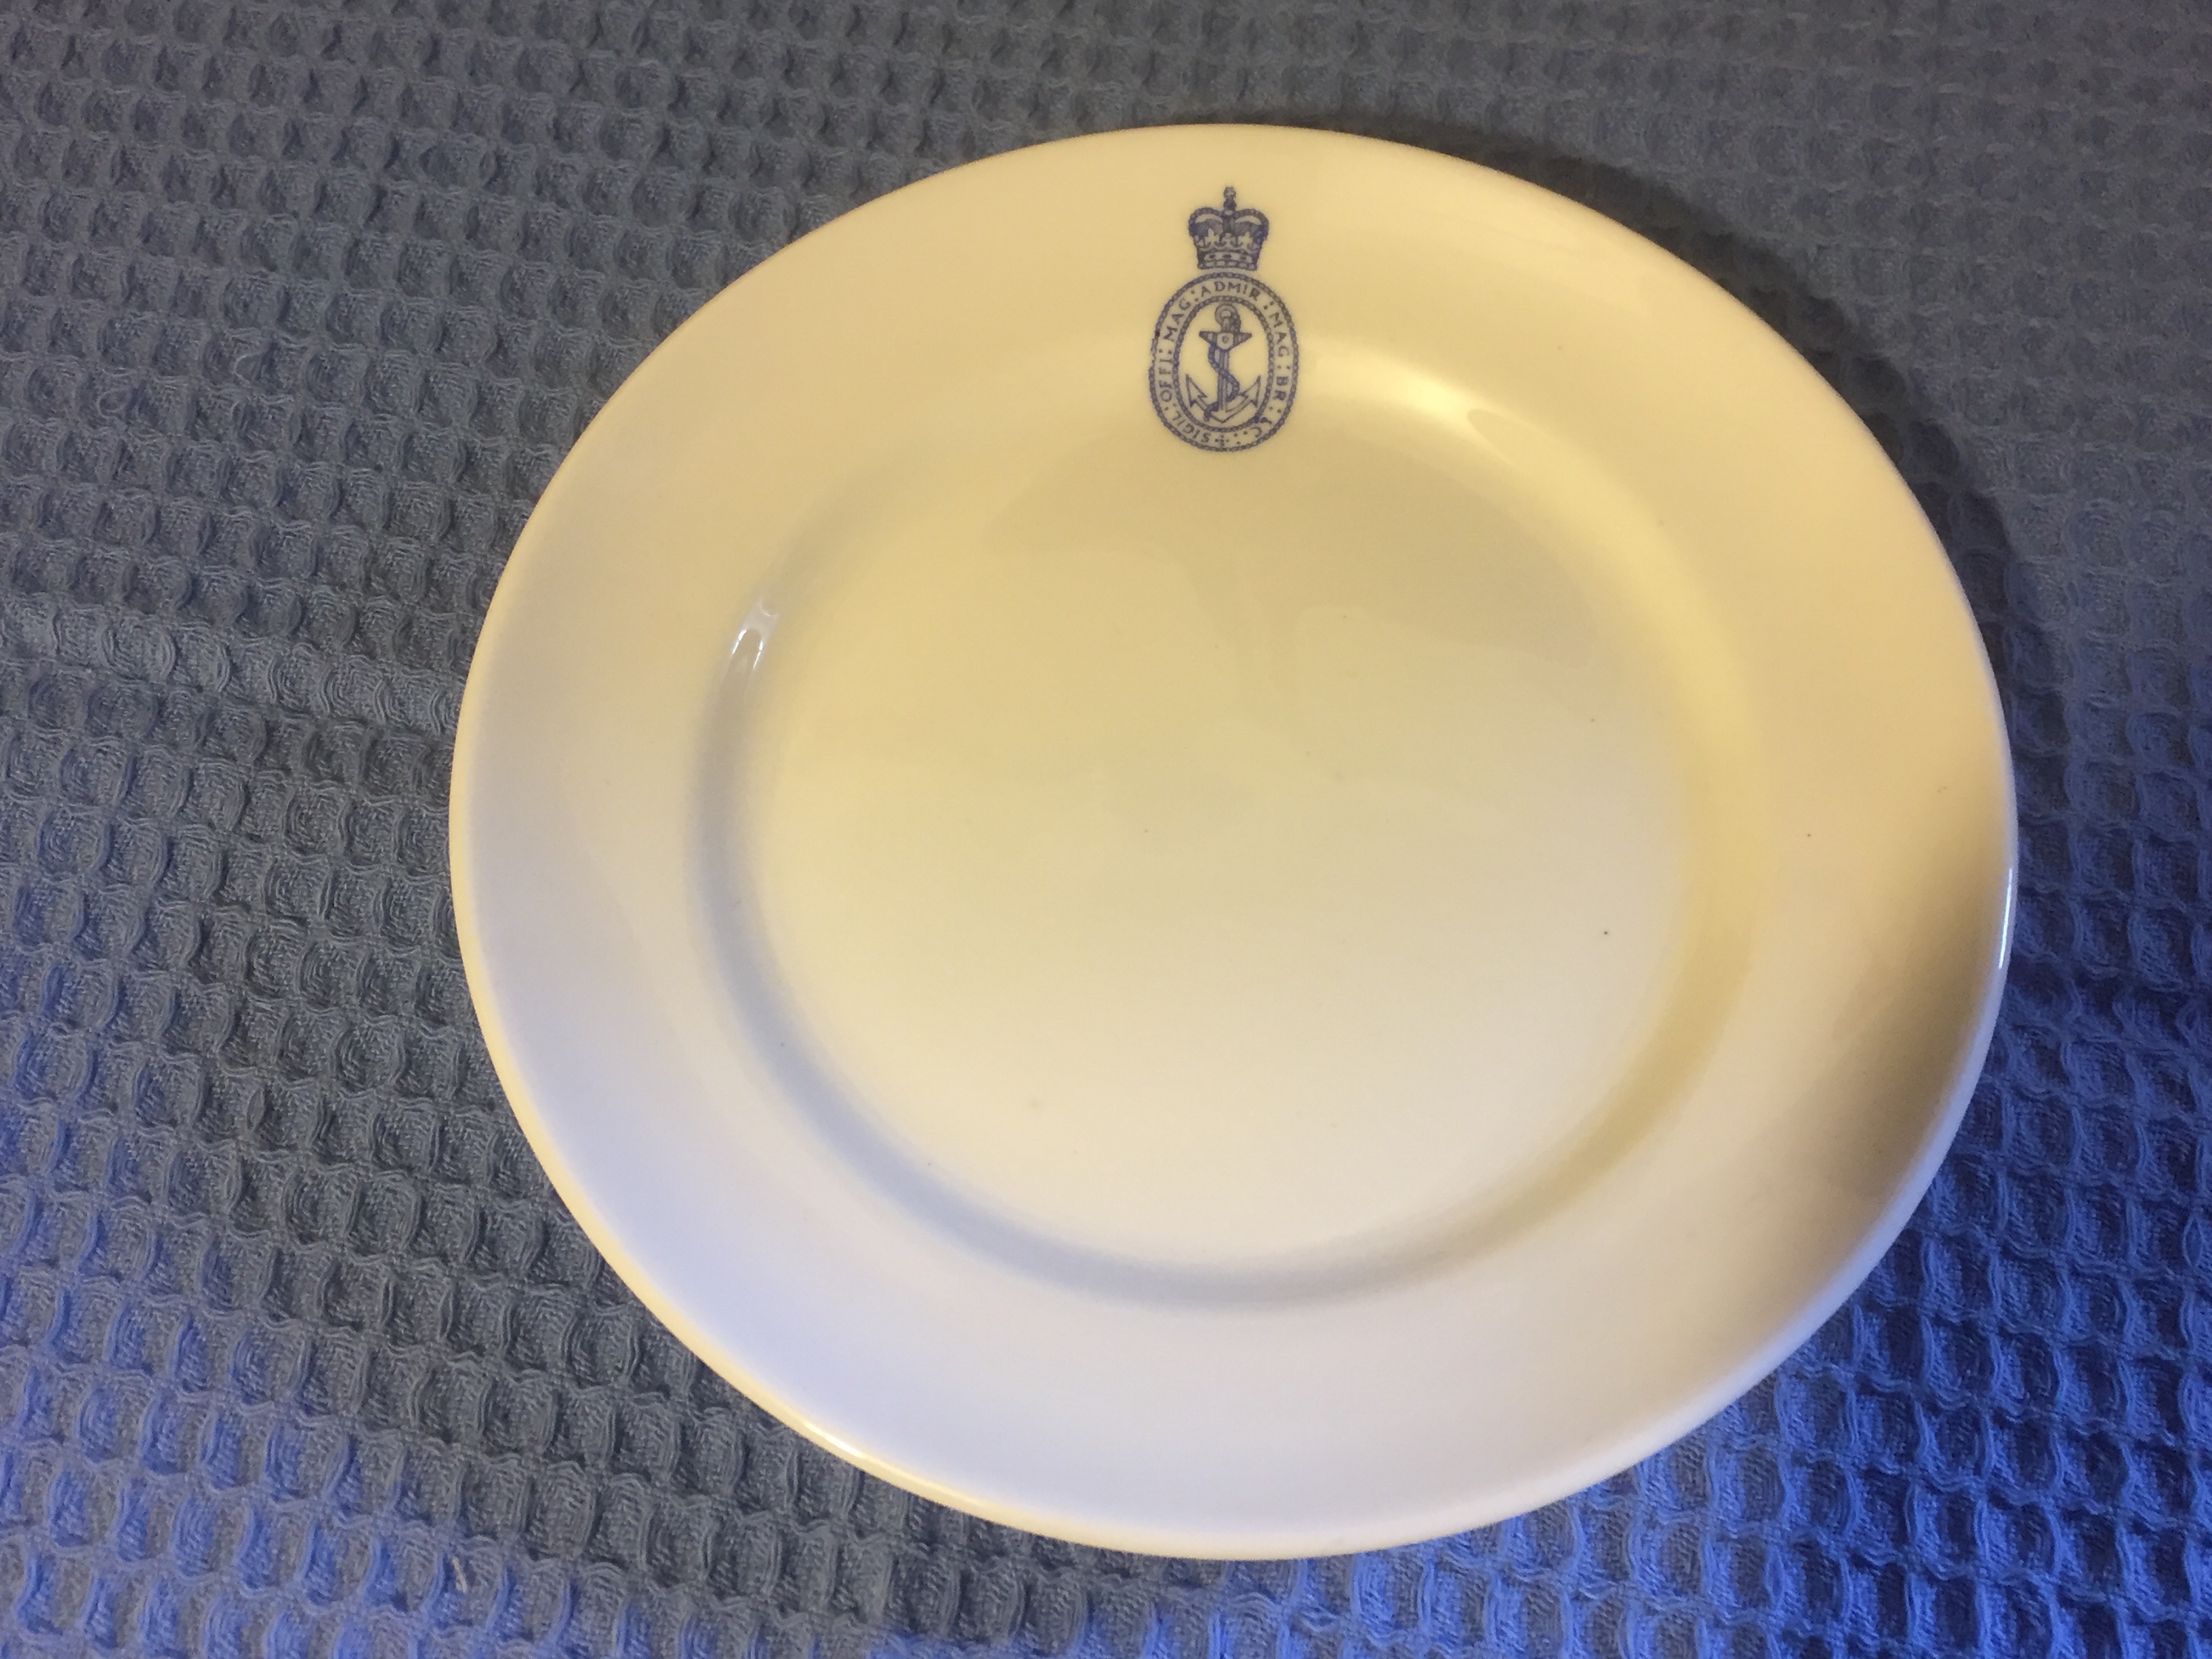 ORIGINAL ROYAL NAVY AS USED IN SERVICE EARLY TYPE SIDE PLATE